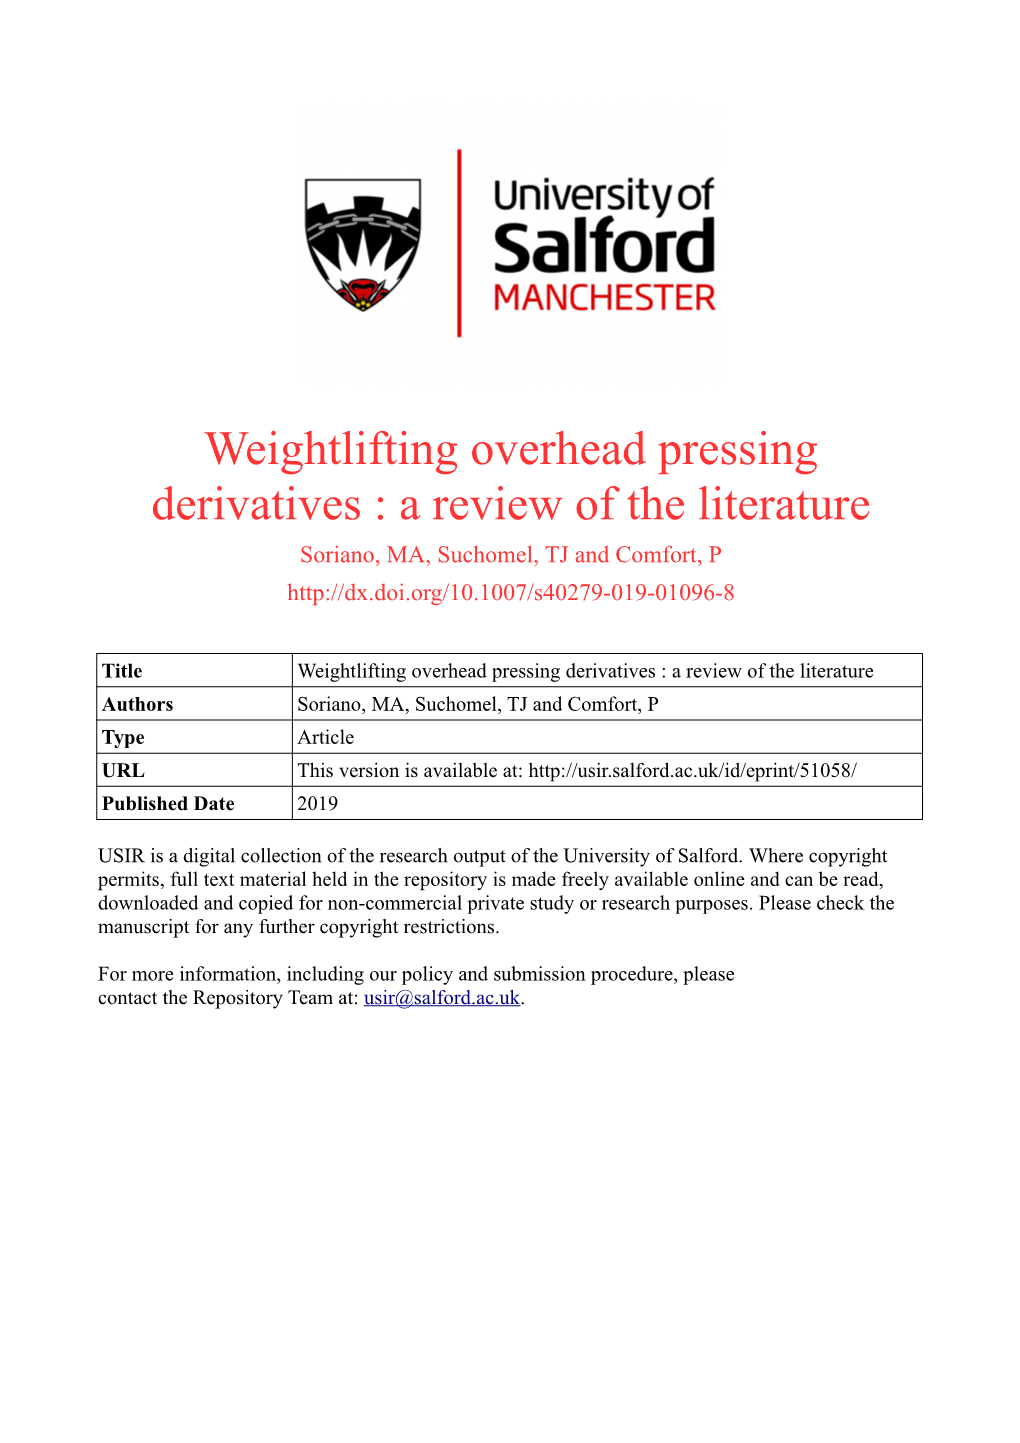 Weightlifting Overhead Pressing Derivatives : a Review of the Literature Soriano, MA, Suchomel, TJ and Comfort, P